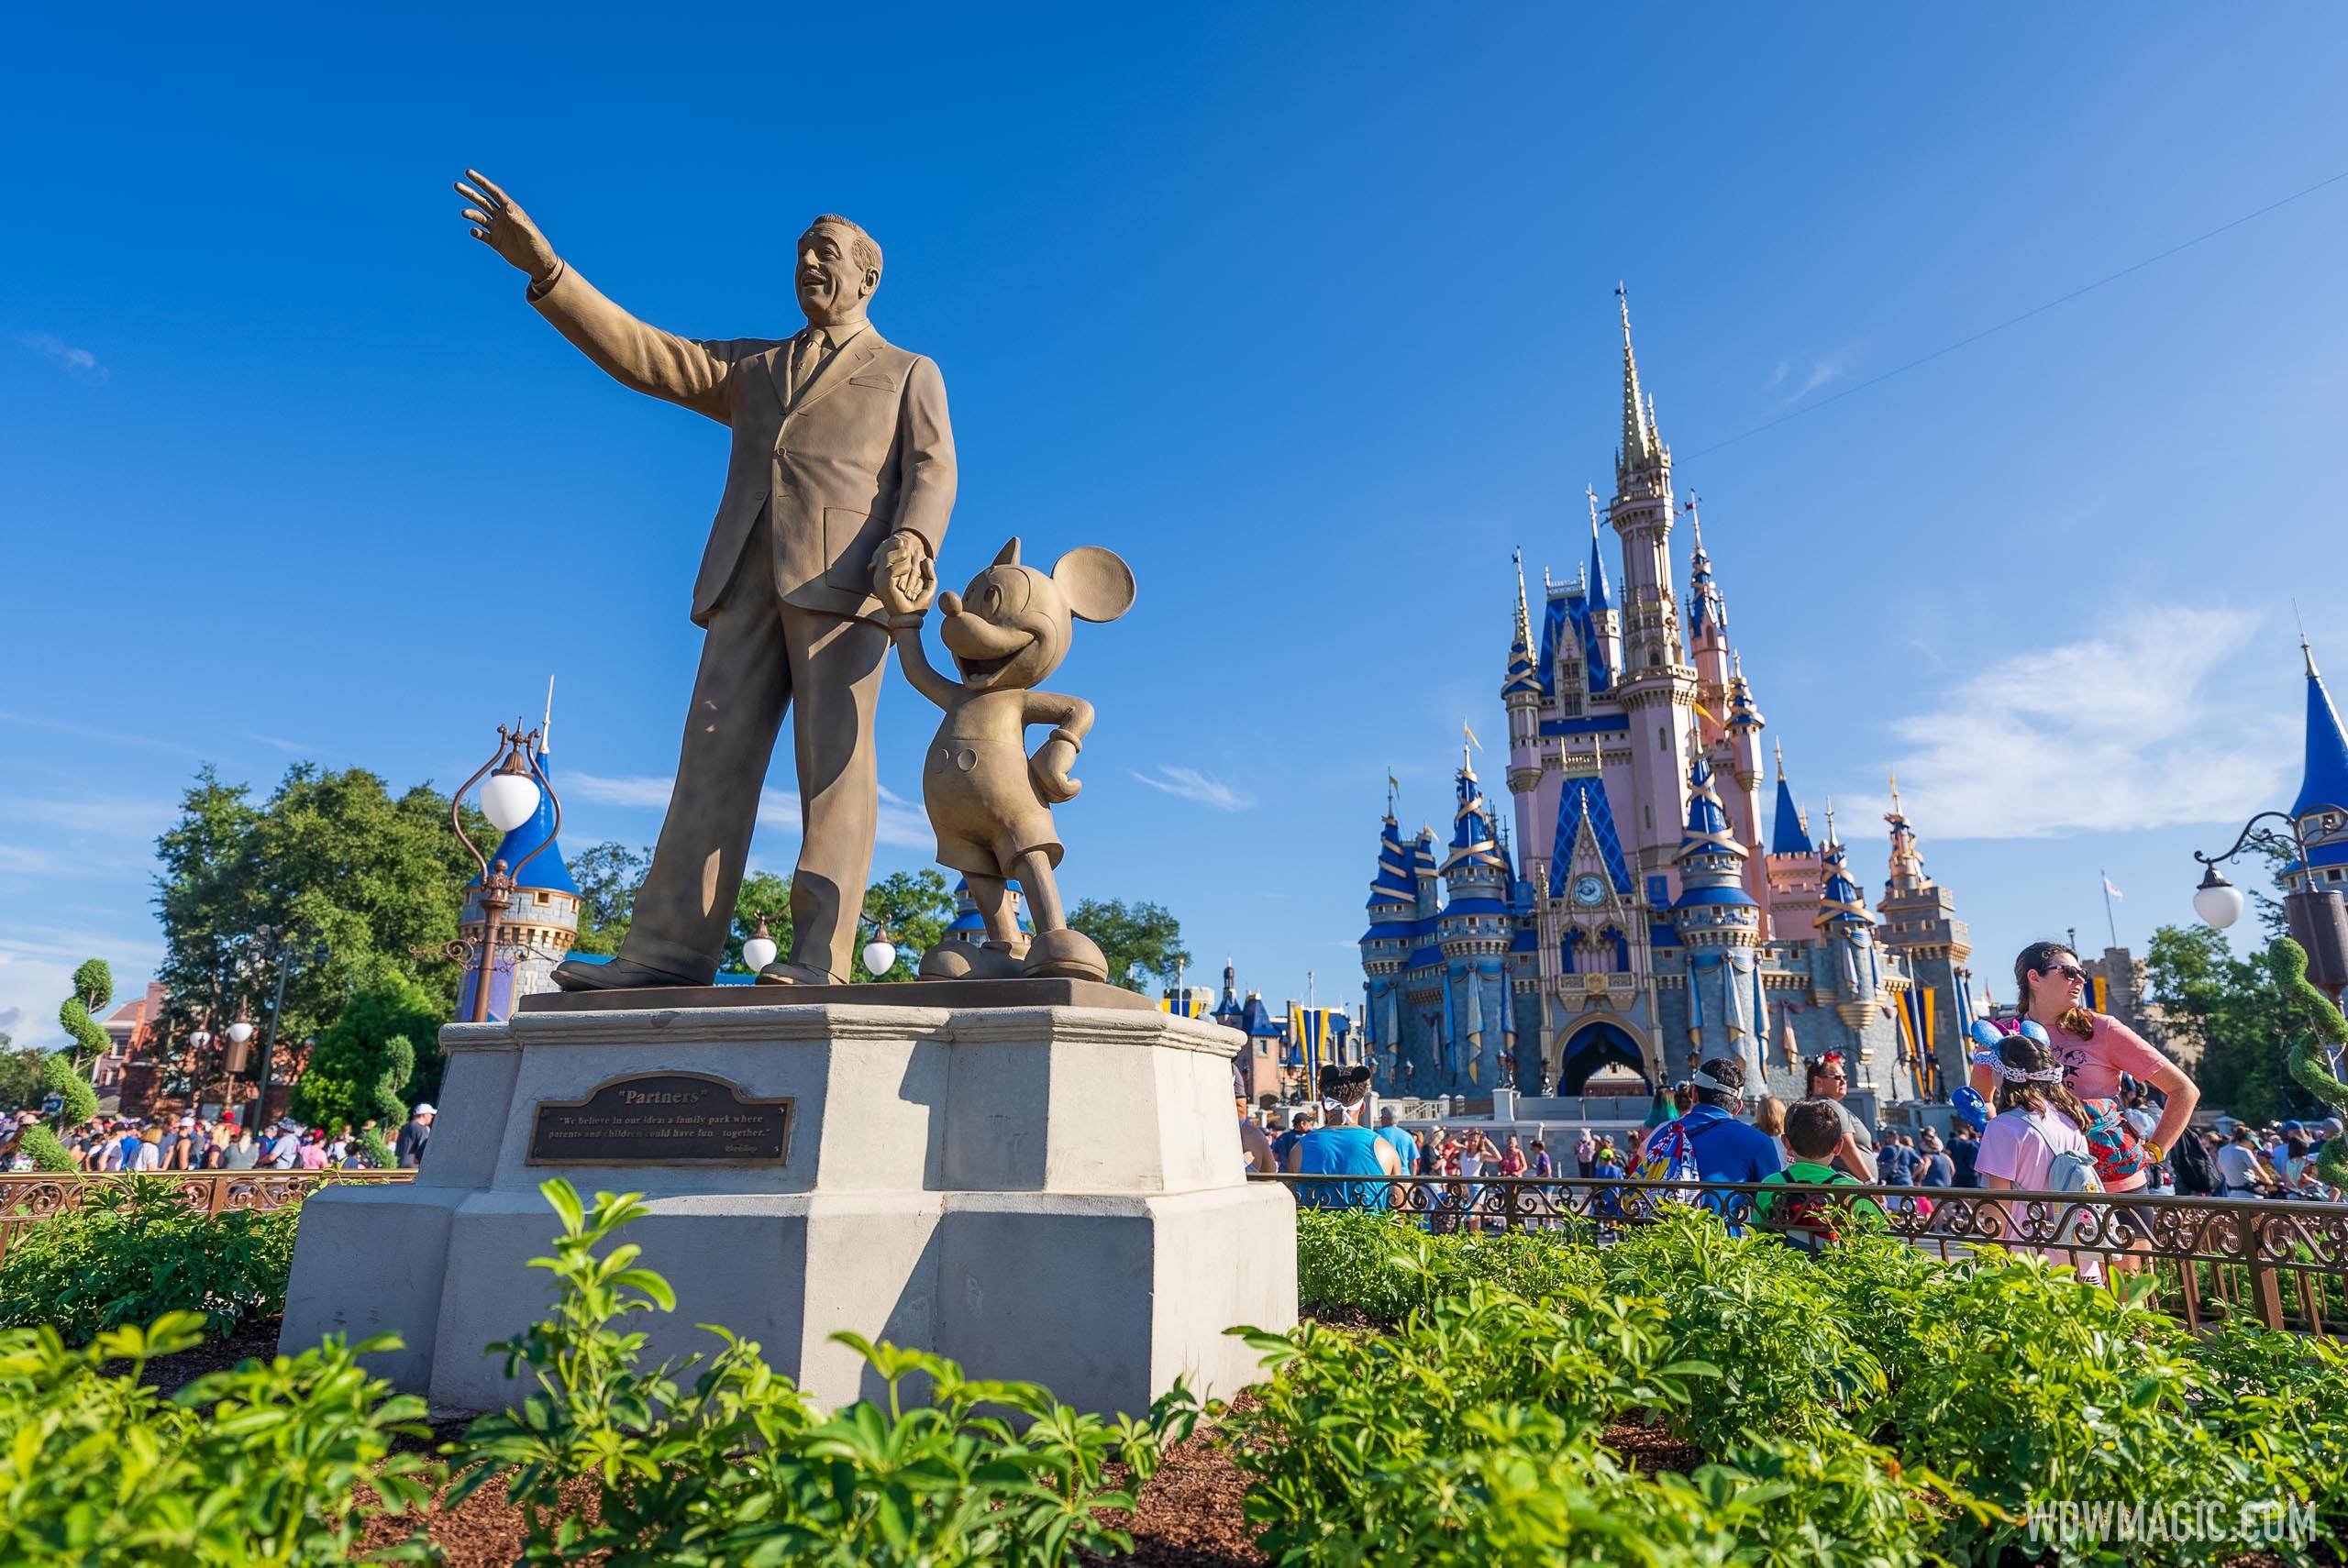 Work begins on the Partners statue at Magic Kingdom